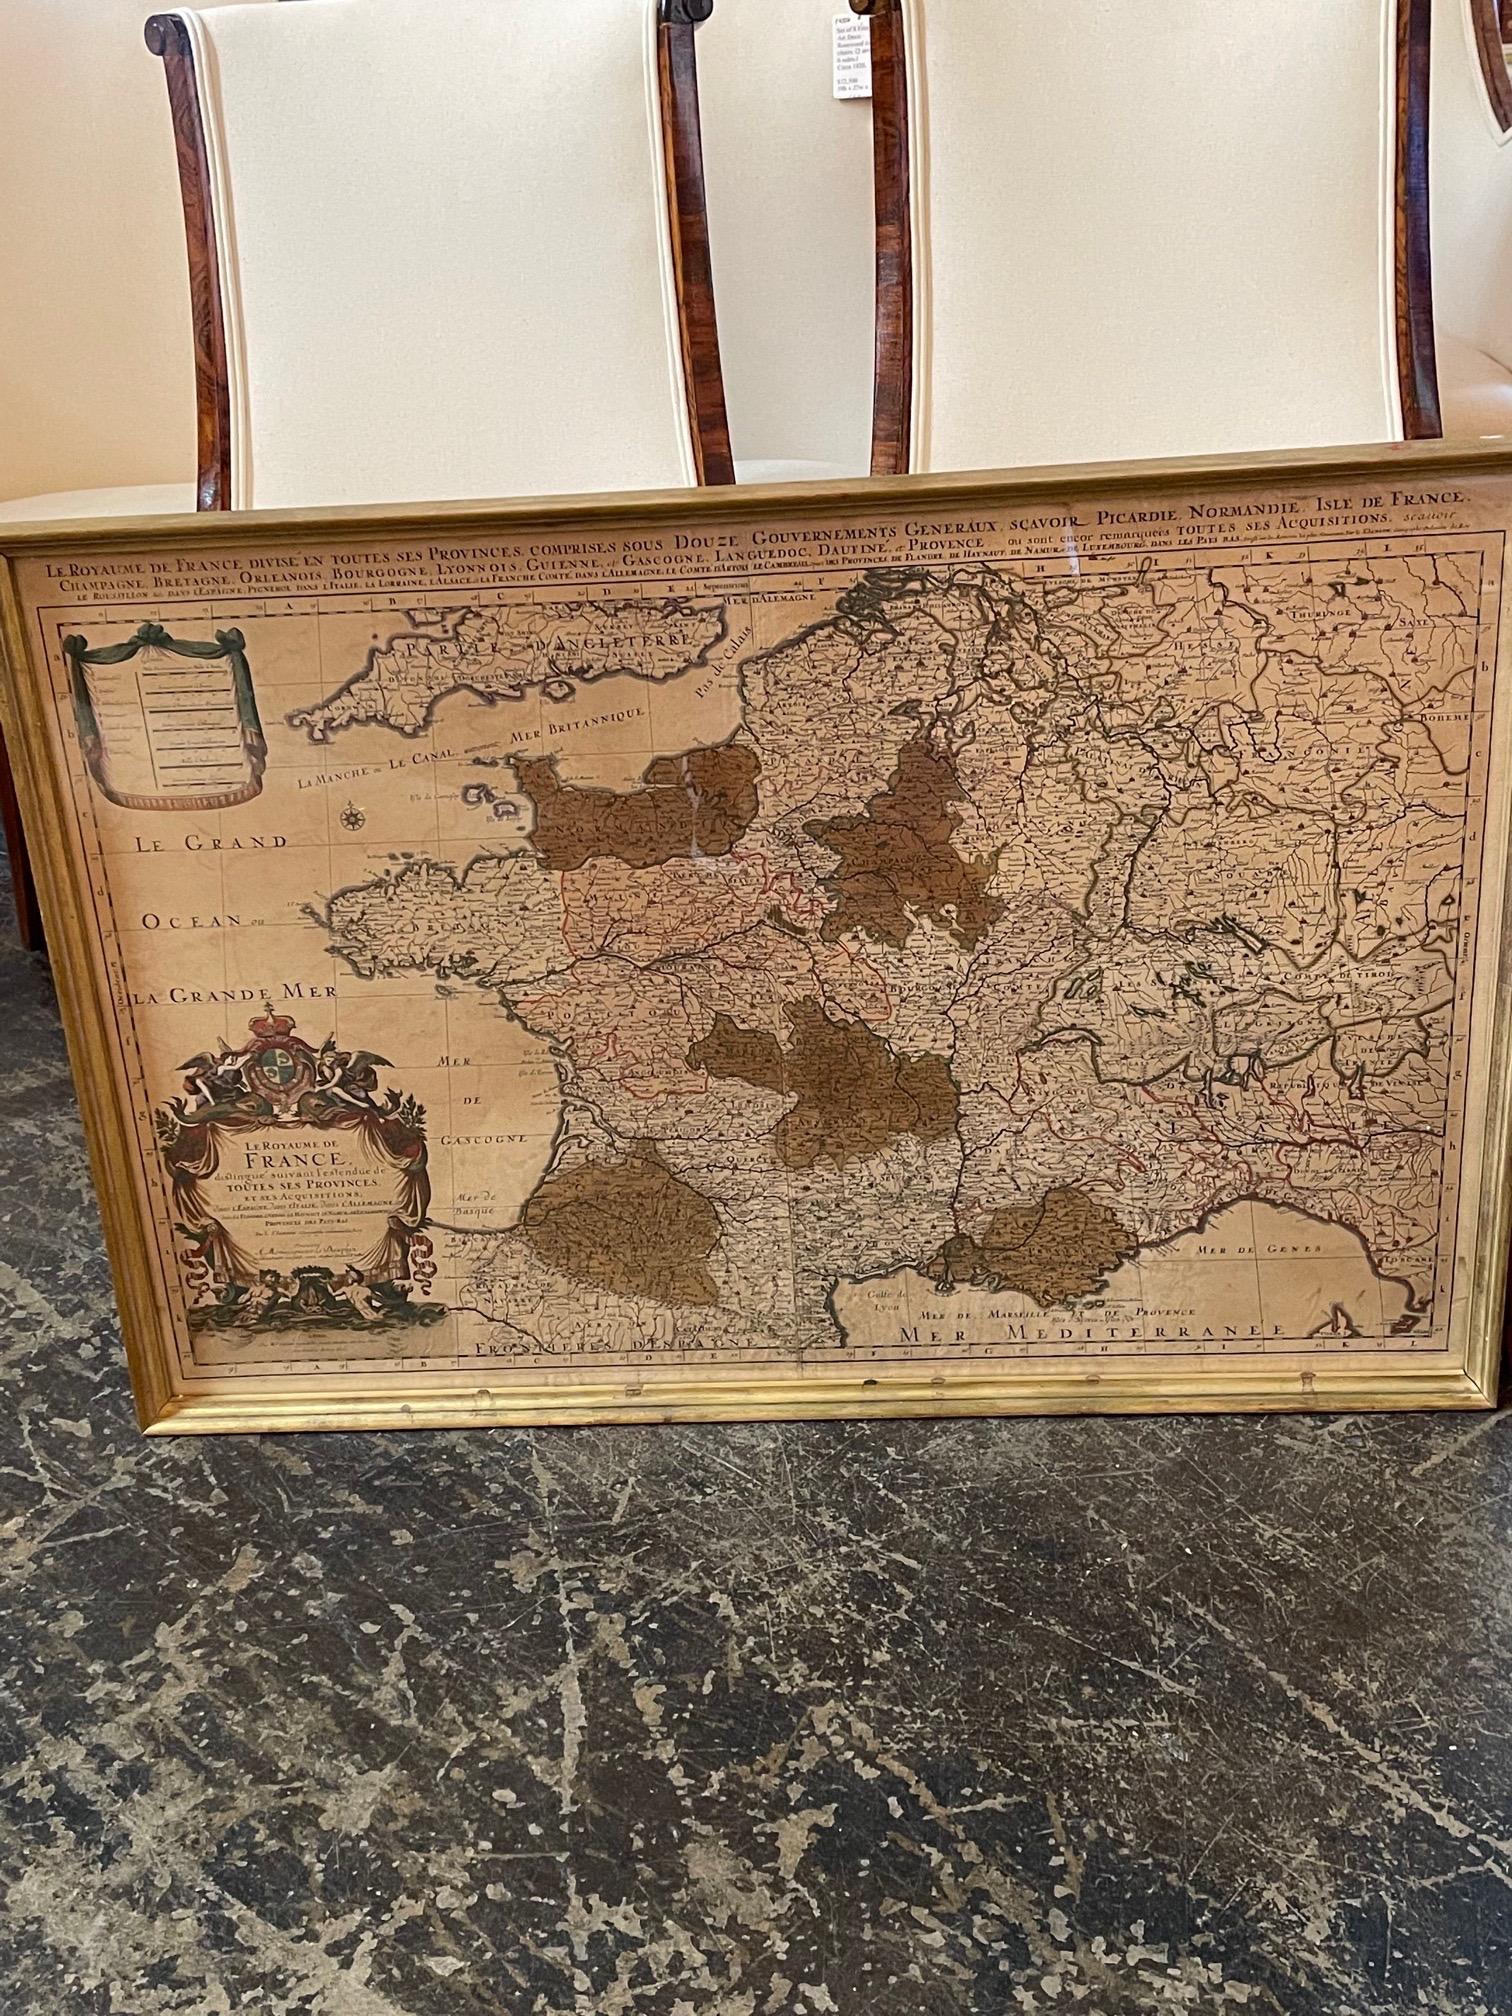 Nice antique map of France in wood frame. This would make a great gift for a collector. A wonderful accessory!